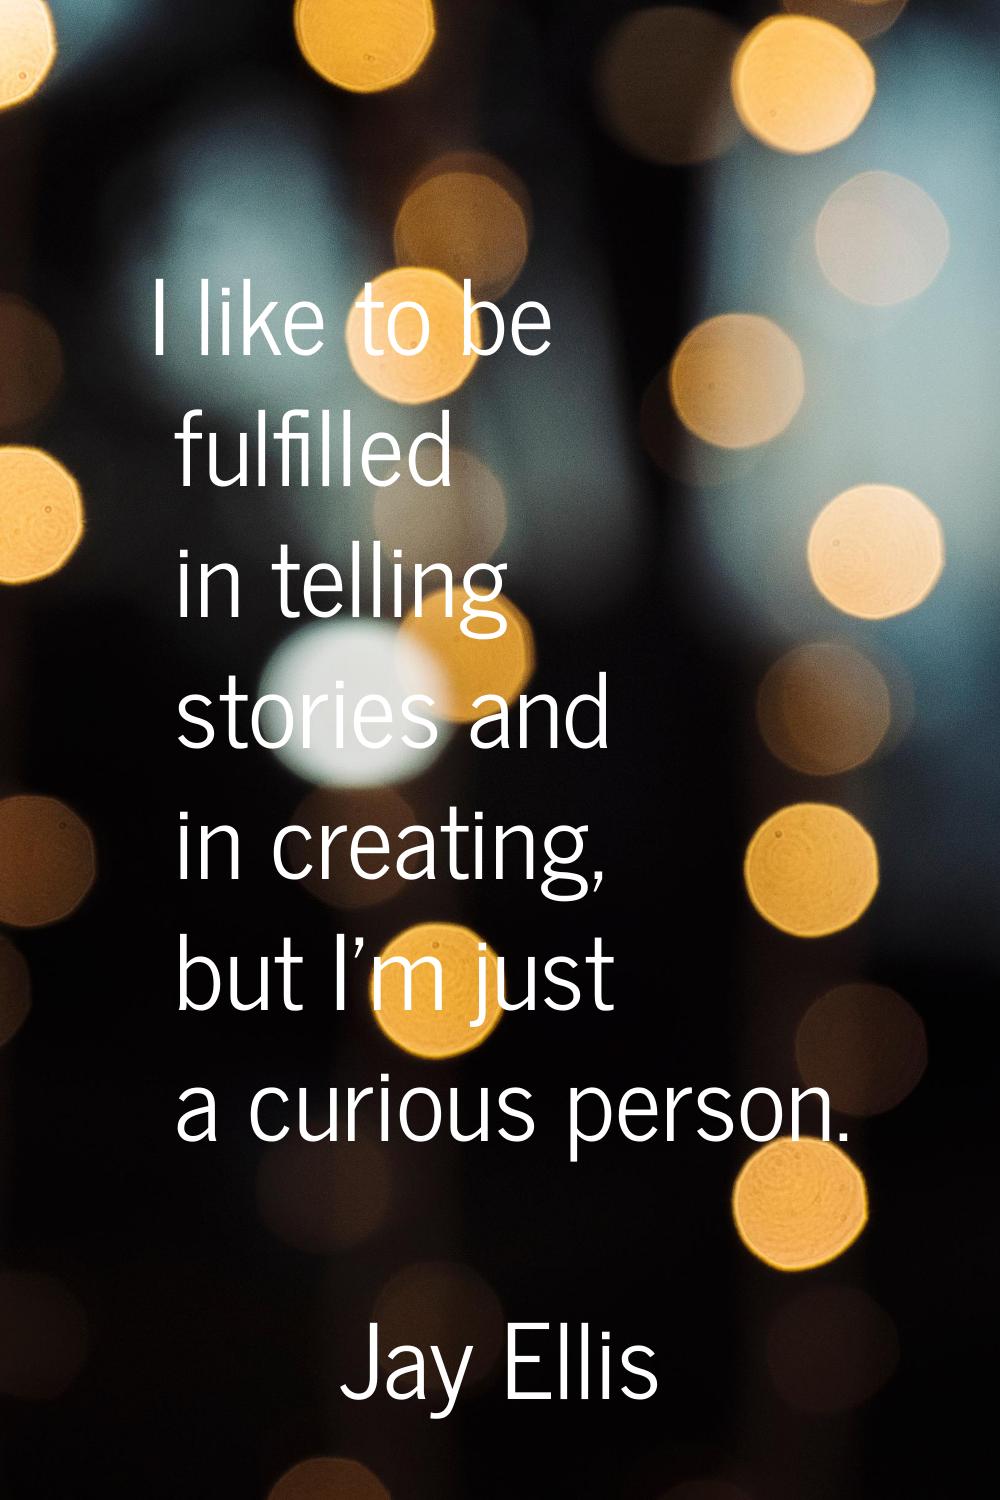 I like to be fulfilled in telling stories and in creating, but I'm just a curious person.